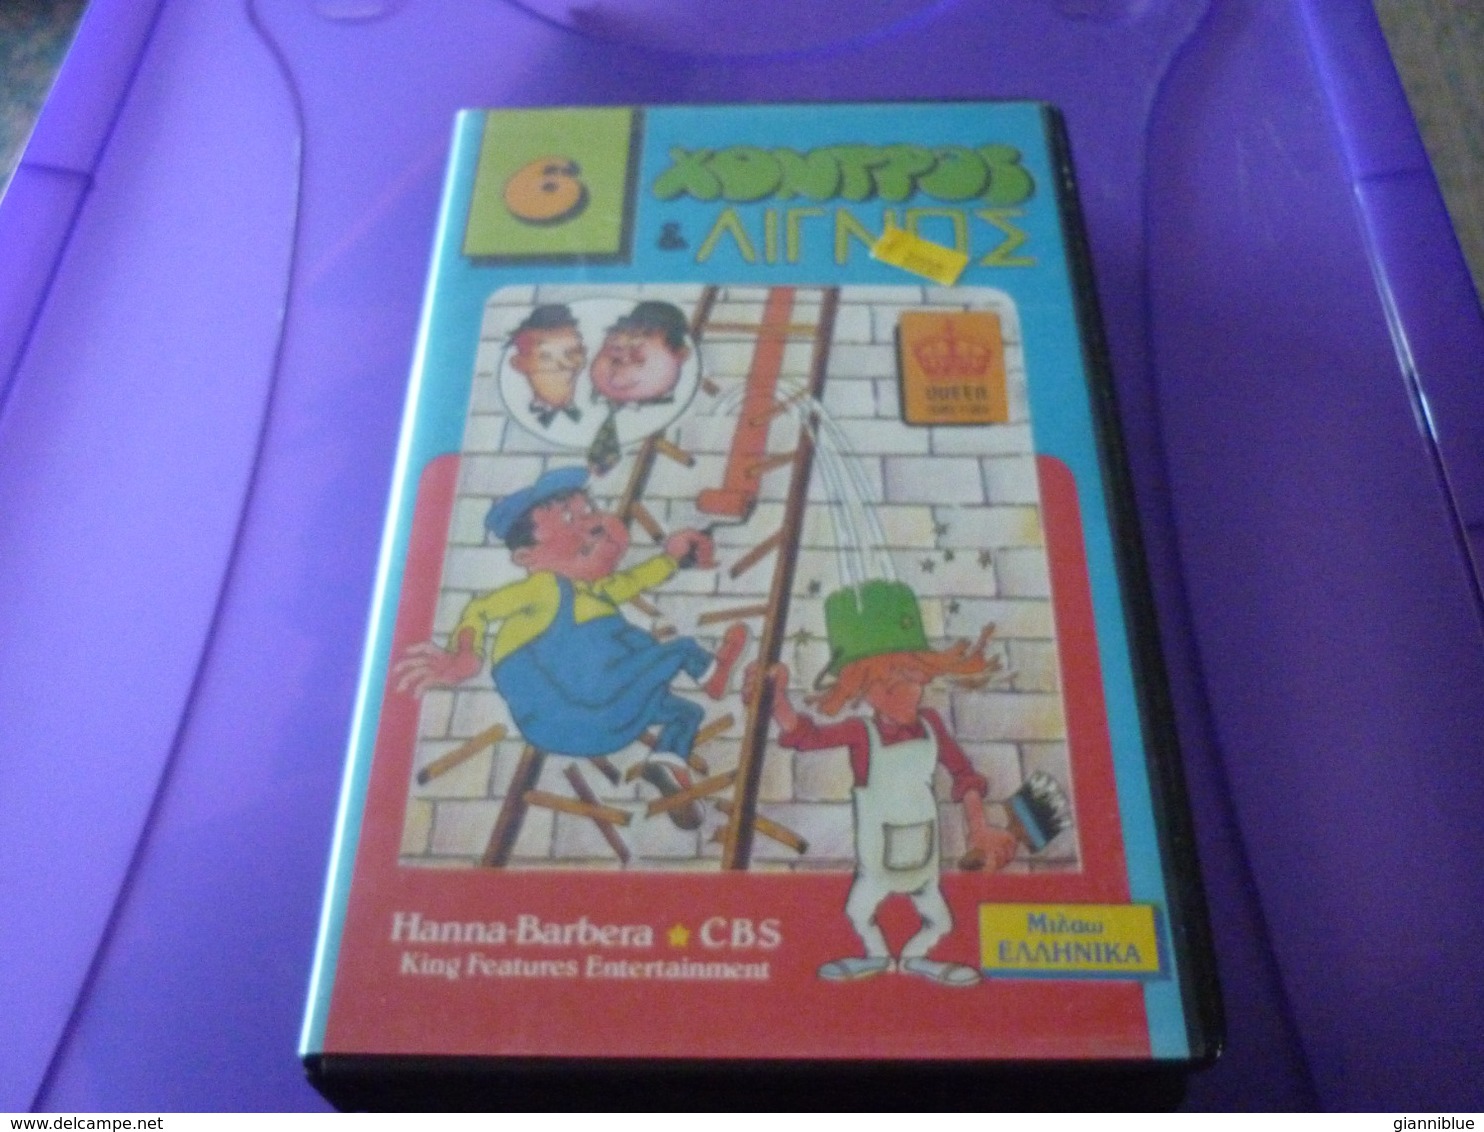 Laurel And Hardy Old Greek Vhs Tape Cassette From Greece - Children & Family